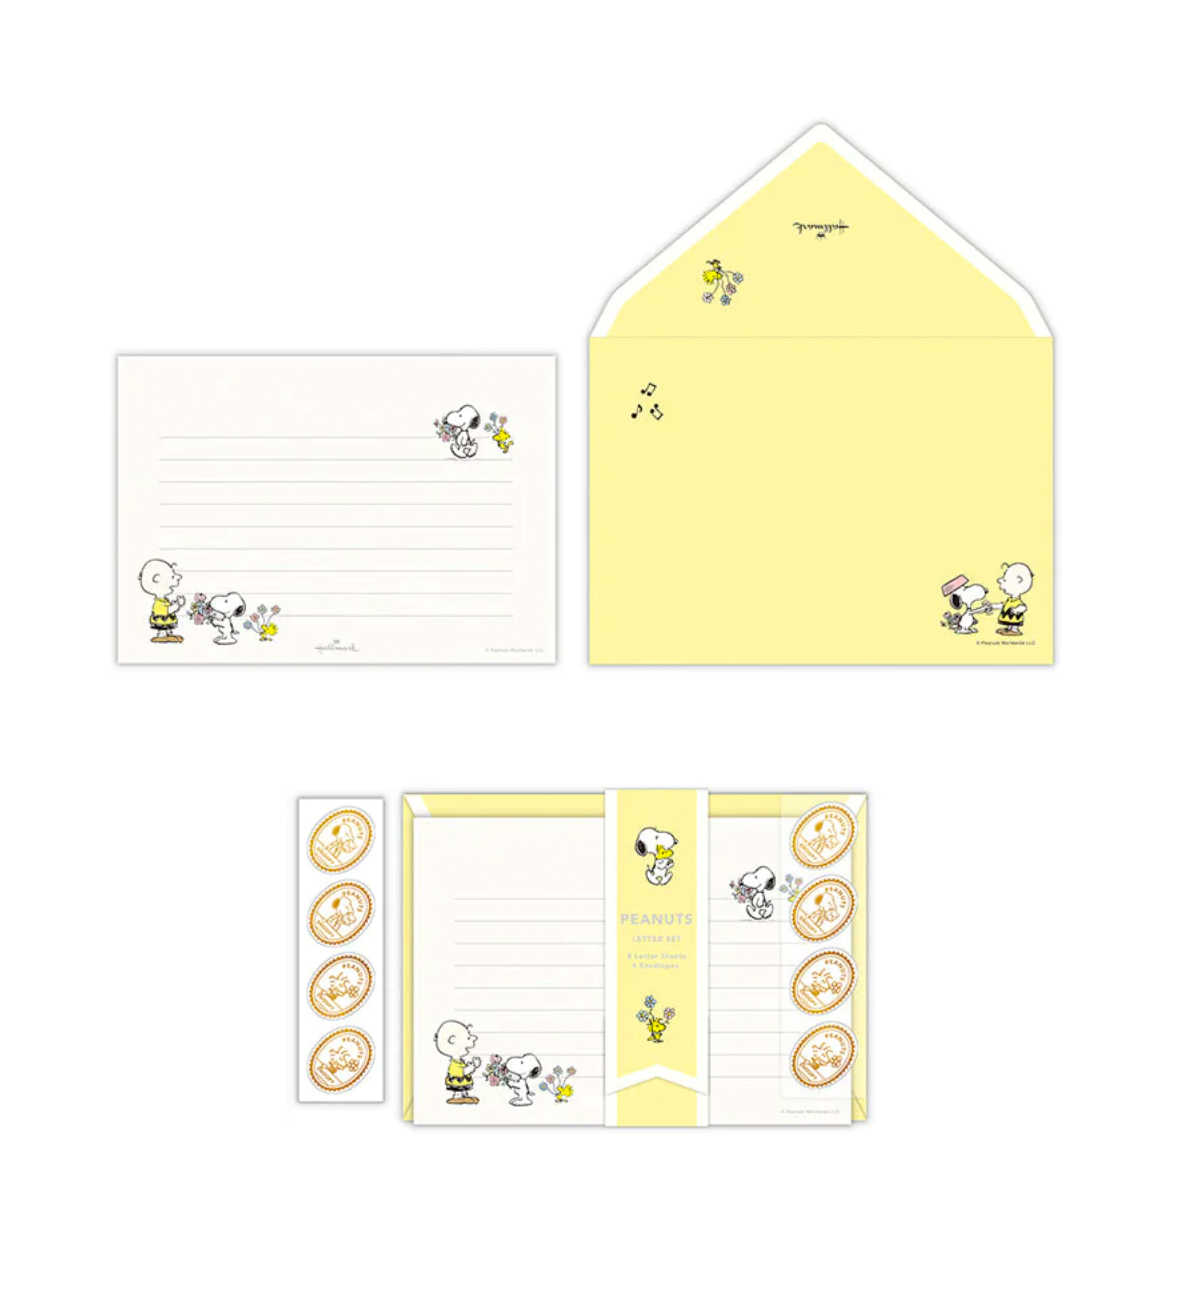 Peanuts Snoopy Be Yourself Letter Set [Yellow]